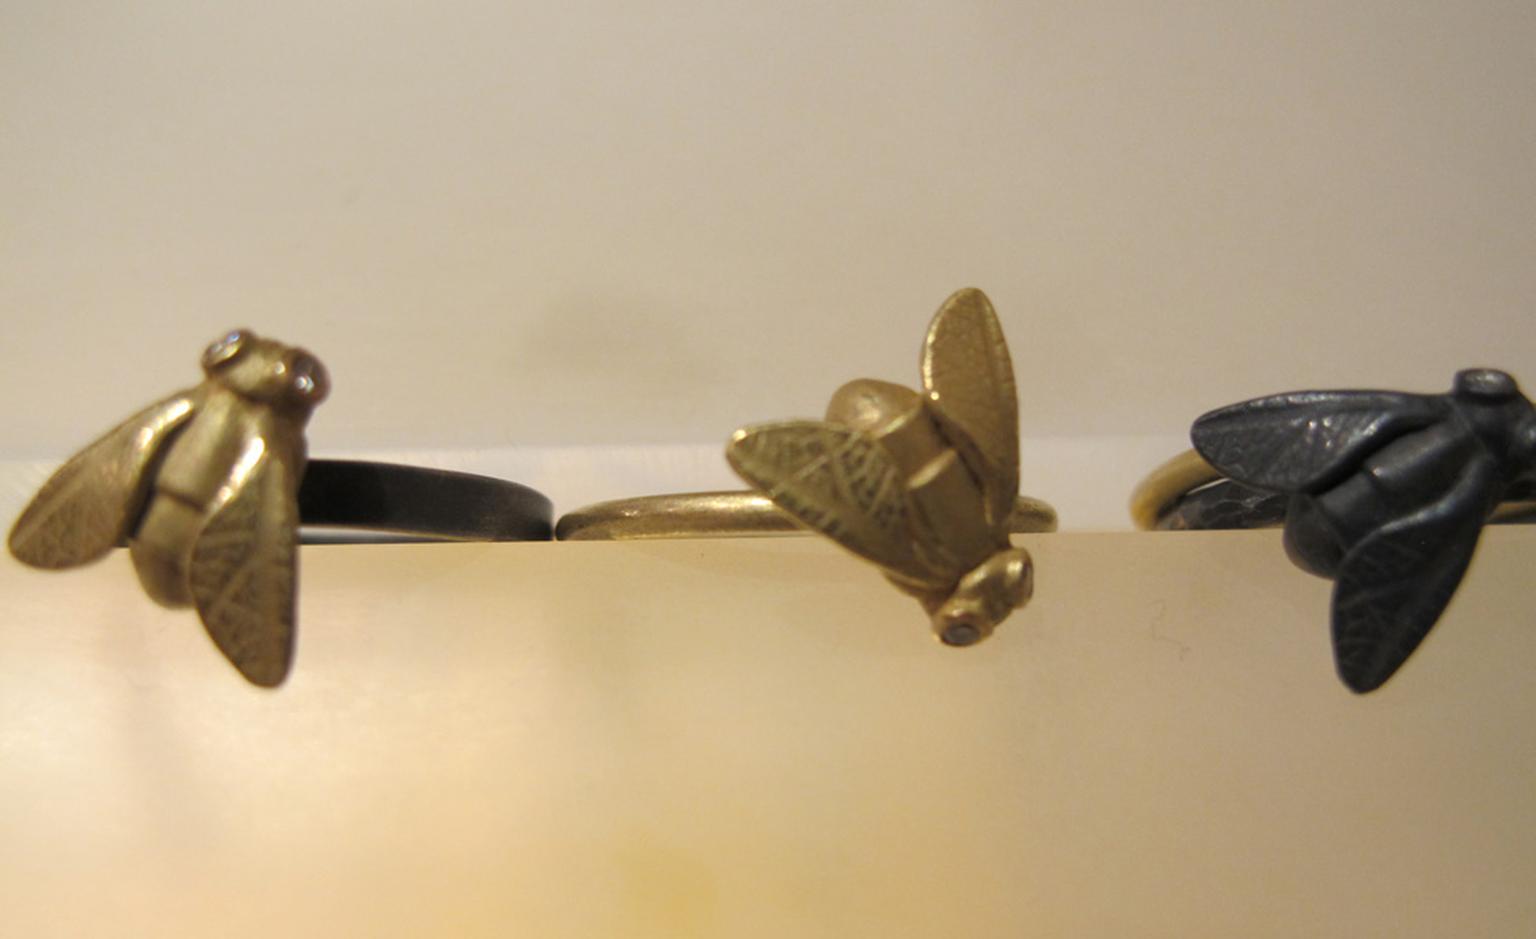 A small swarm of Zoe Arnold's Fly rings in gold and silver with diamond eyes from £295 in gold or £195 in silver.